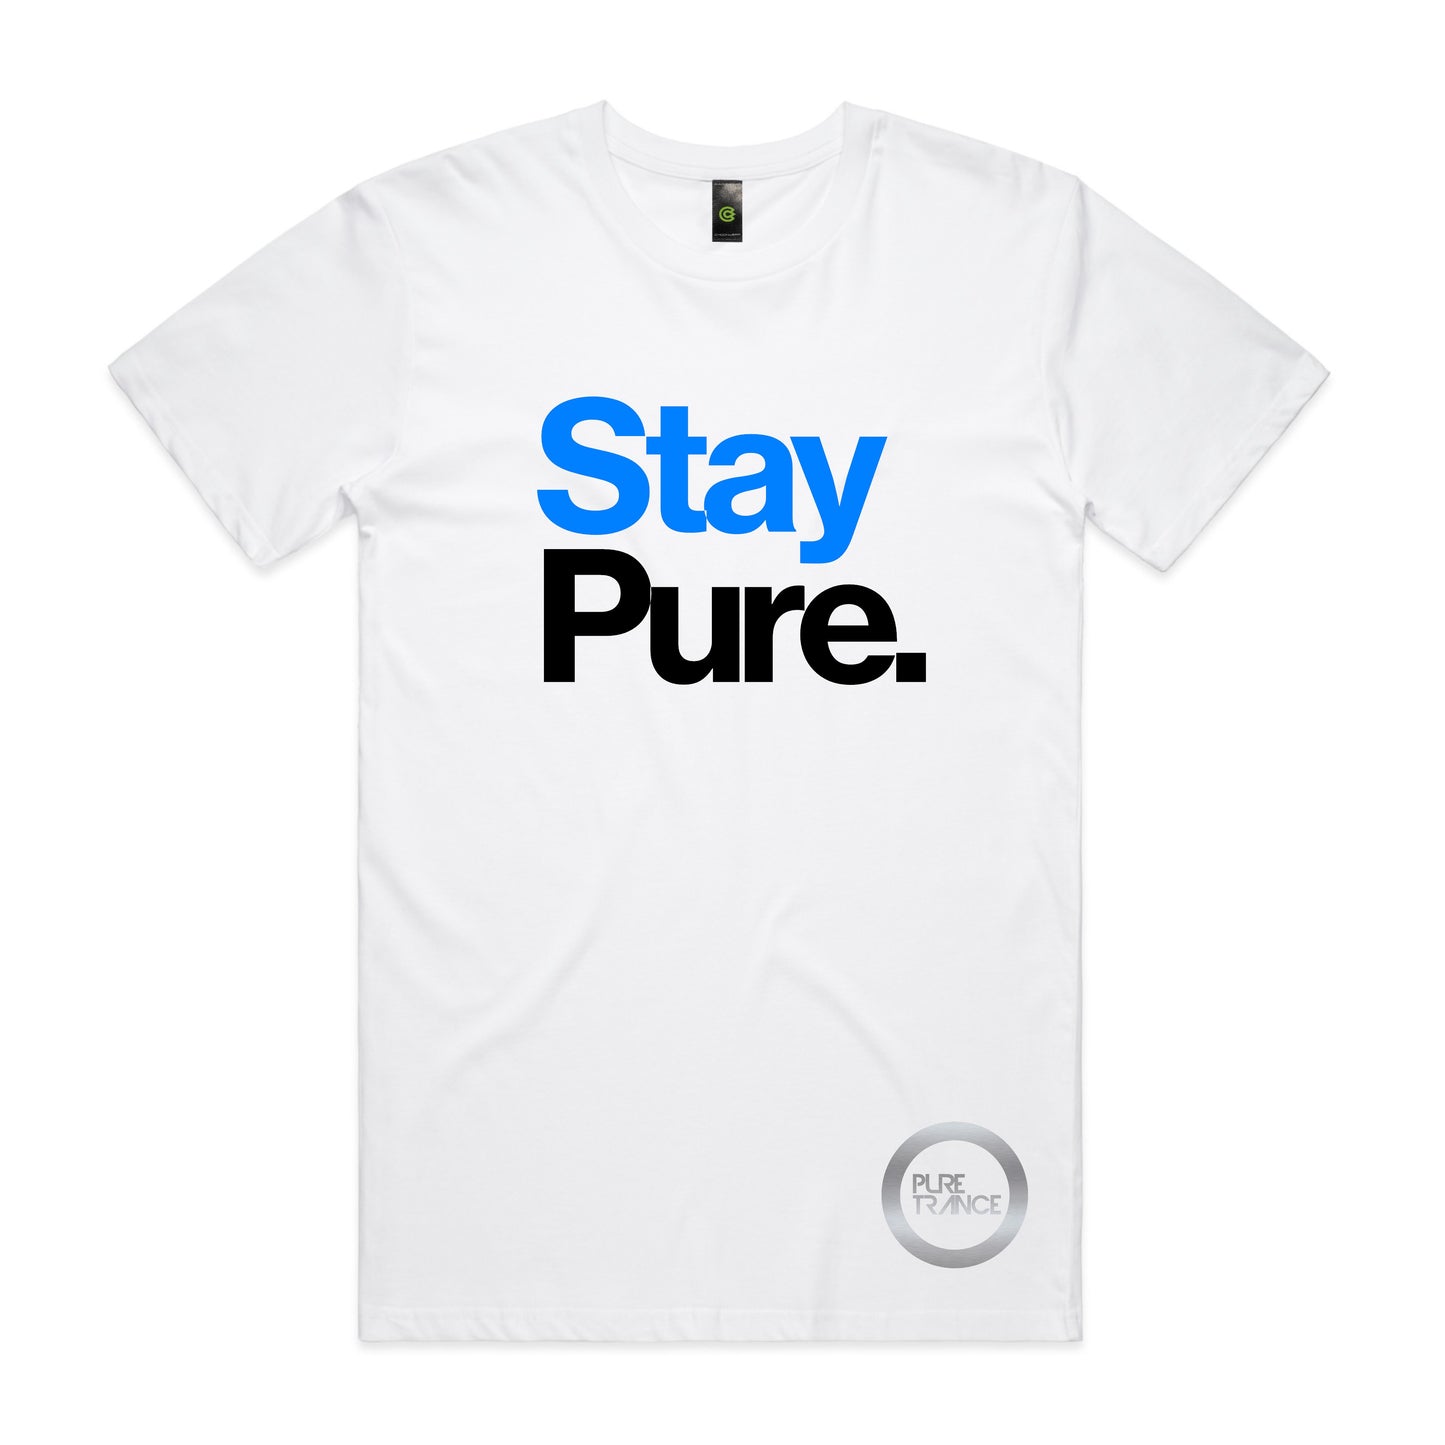 Stay Pure. Unisex Tee